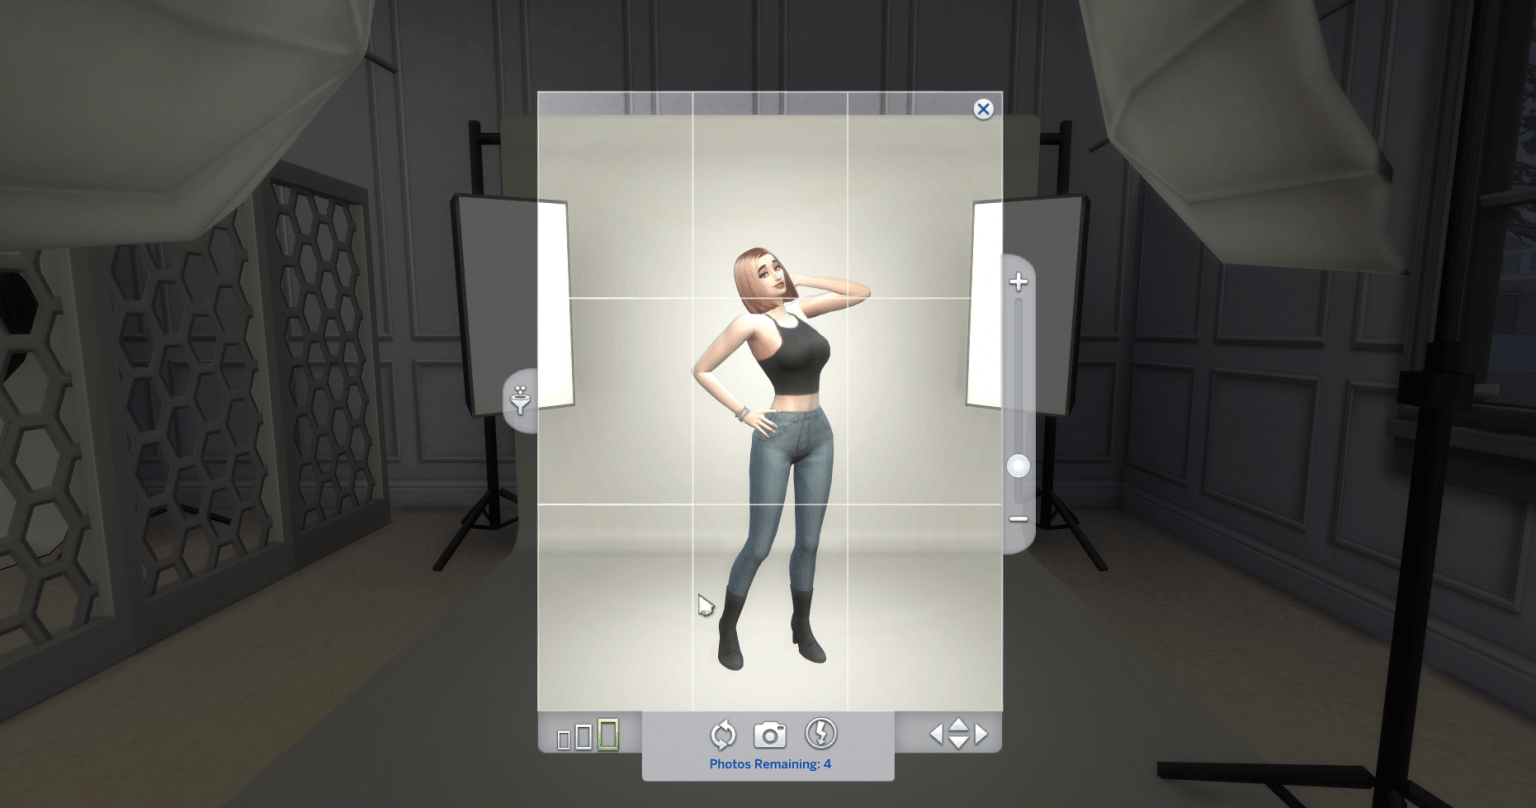 the sims resource 4 modeling career